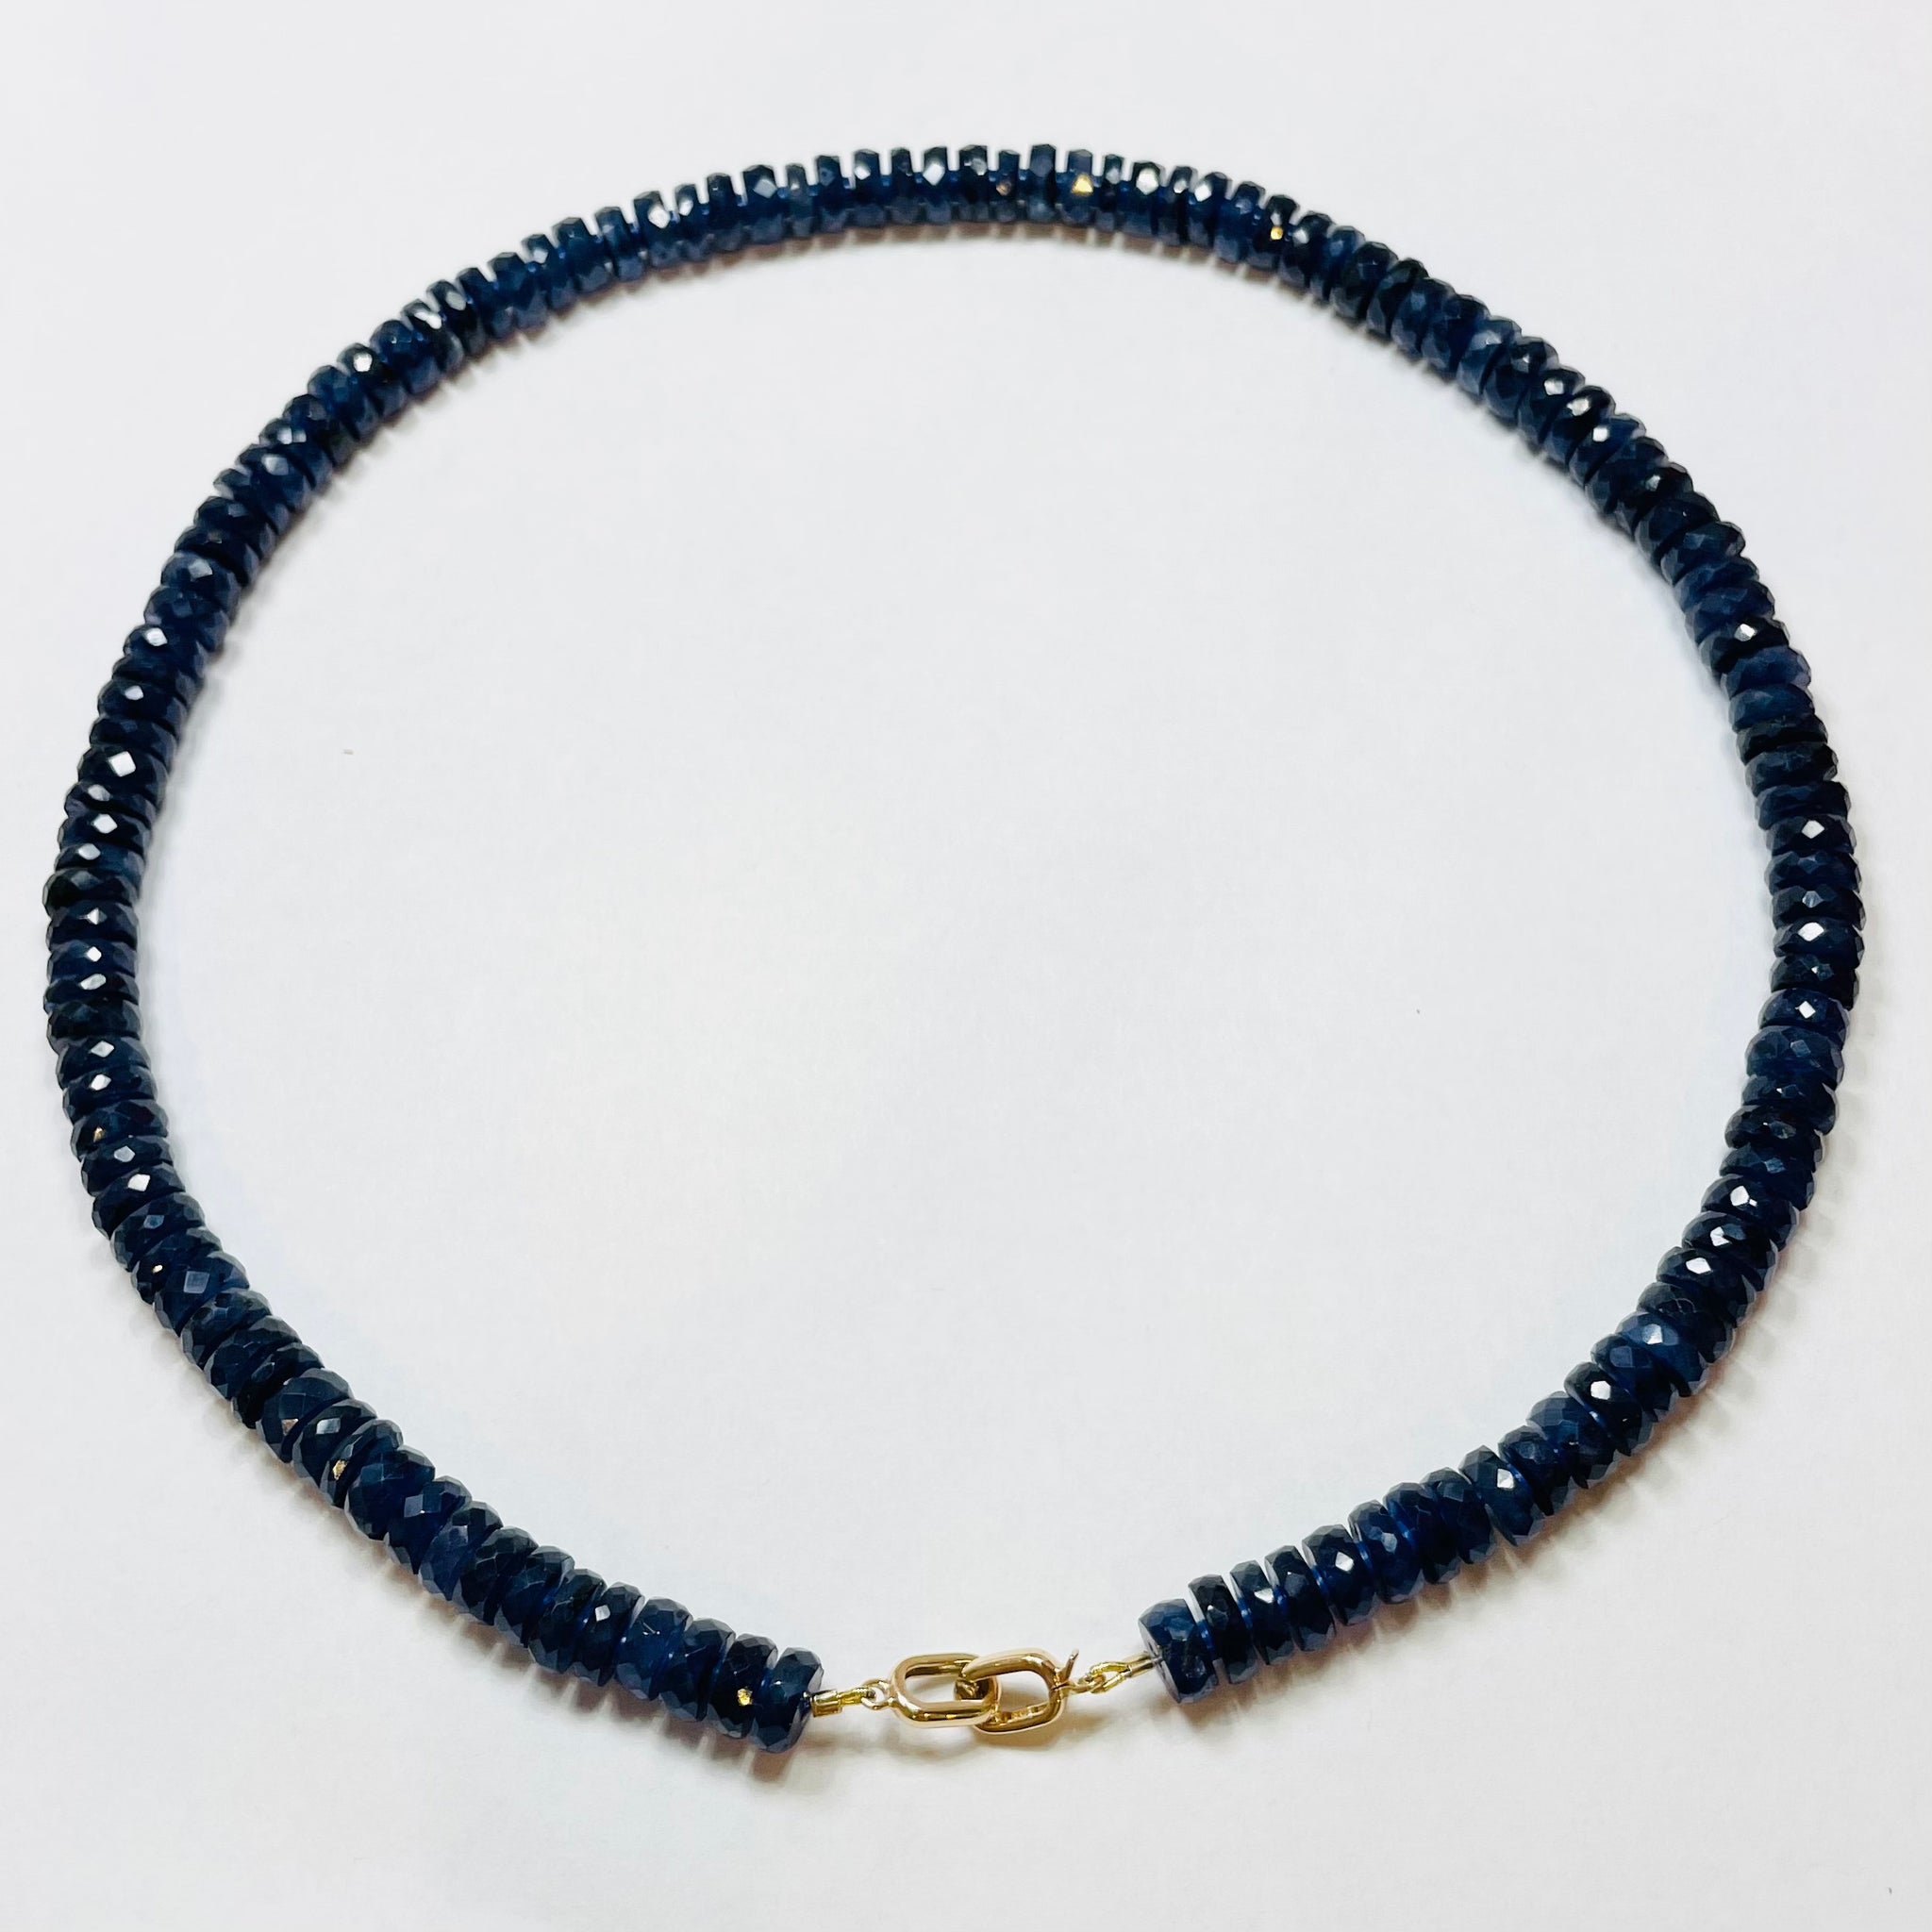 Sapphire faceted heishi cut candy necklace